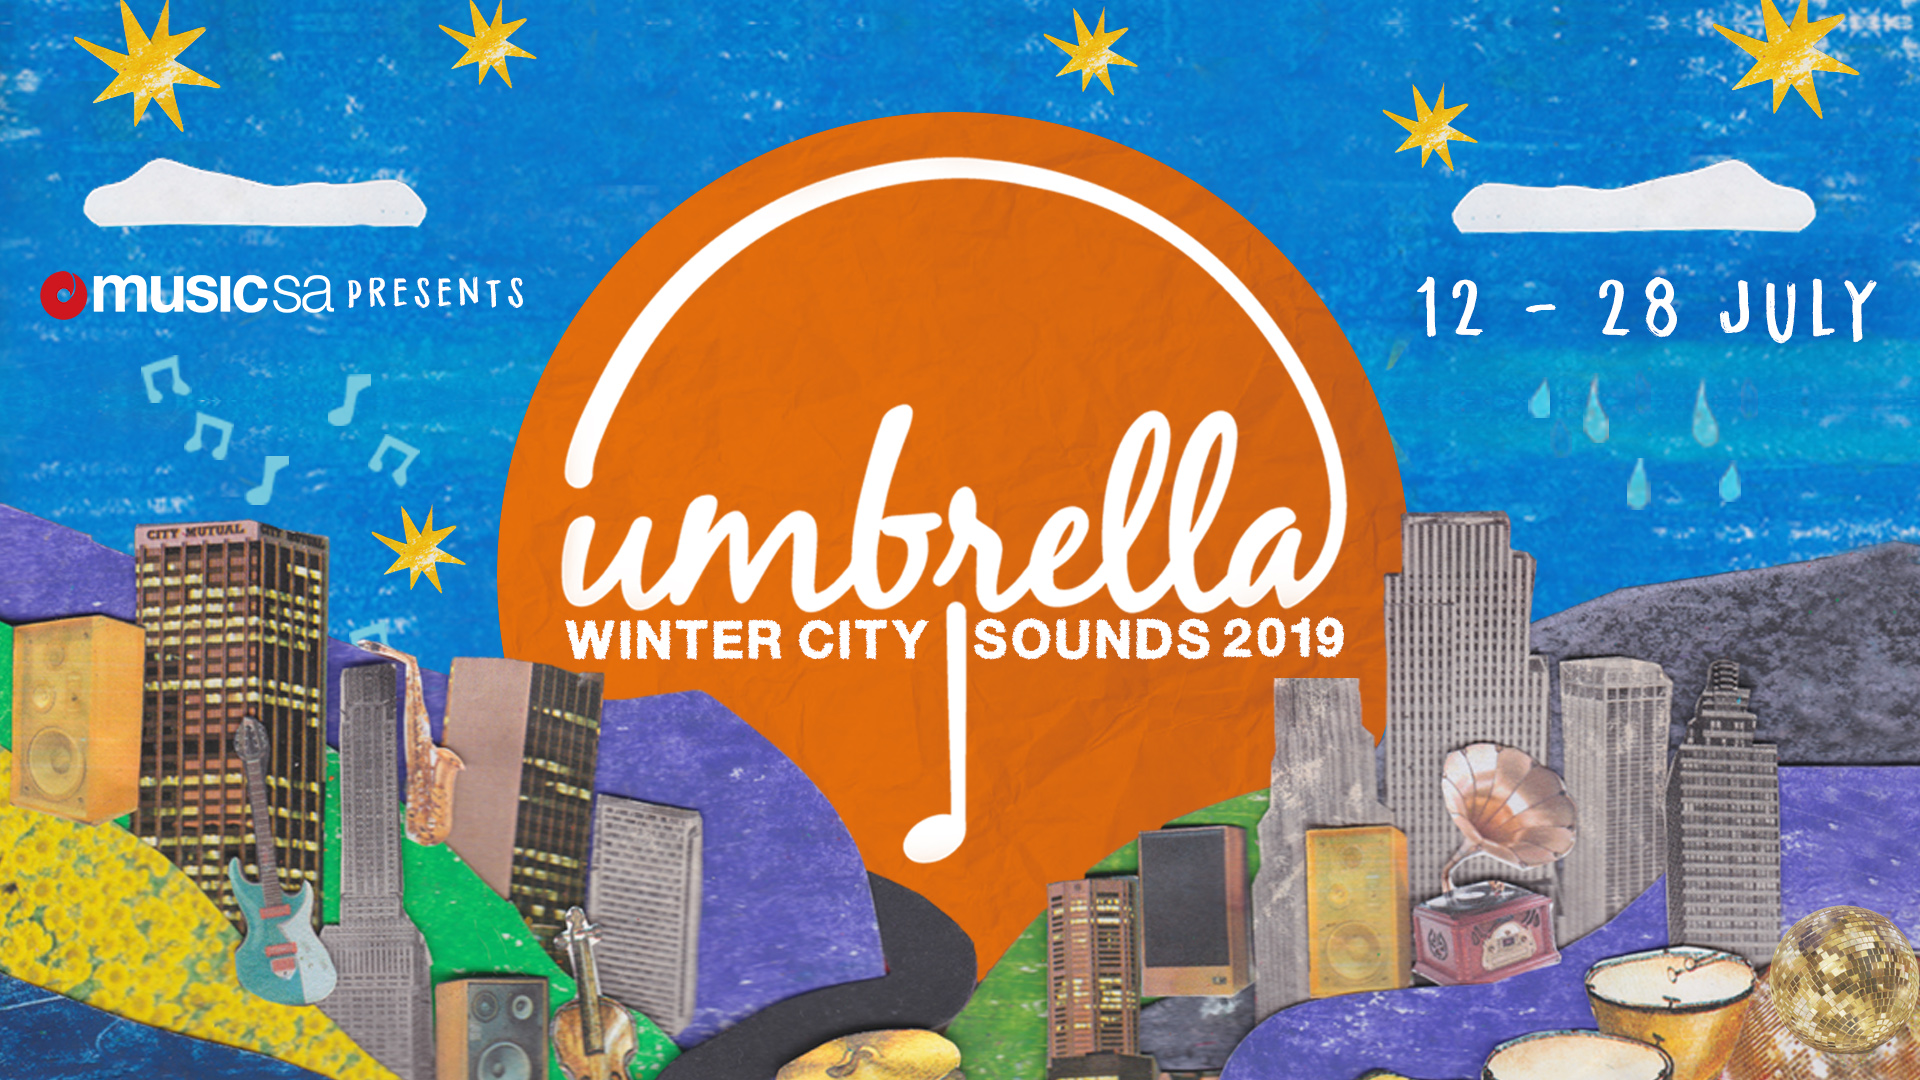 Umbrella Winter City Sounds is Back for 2019!